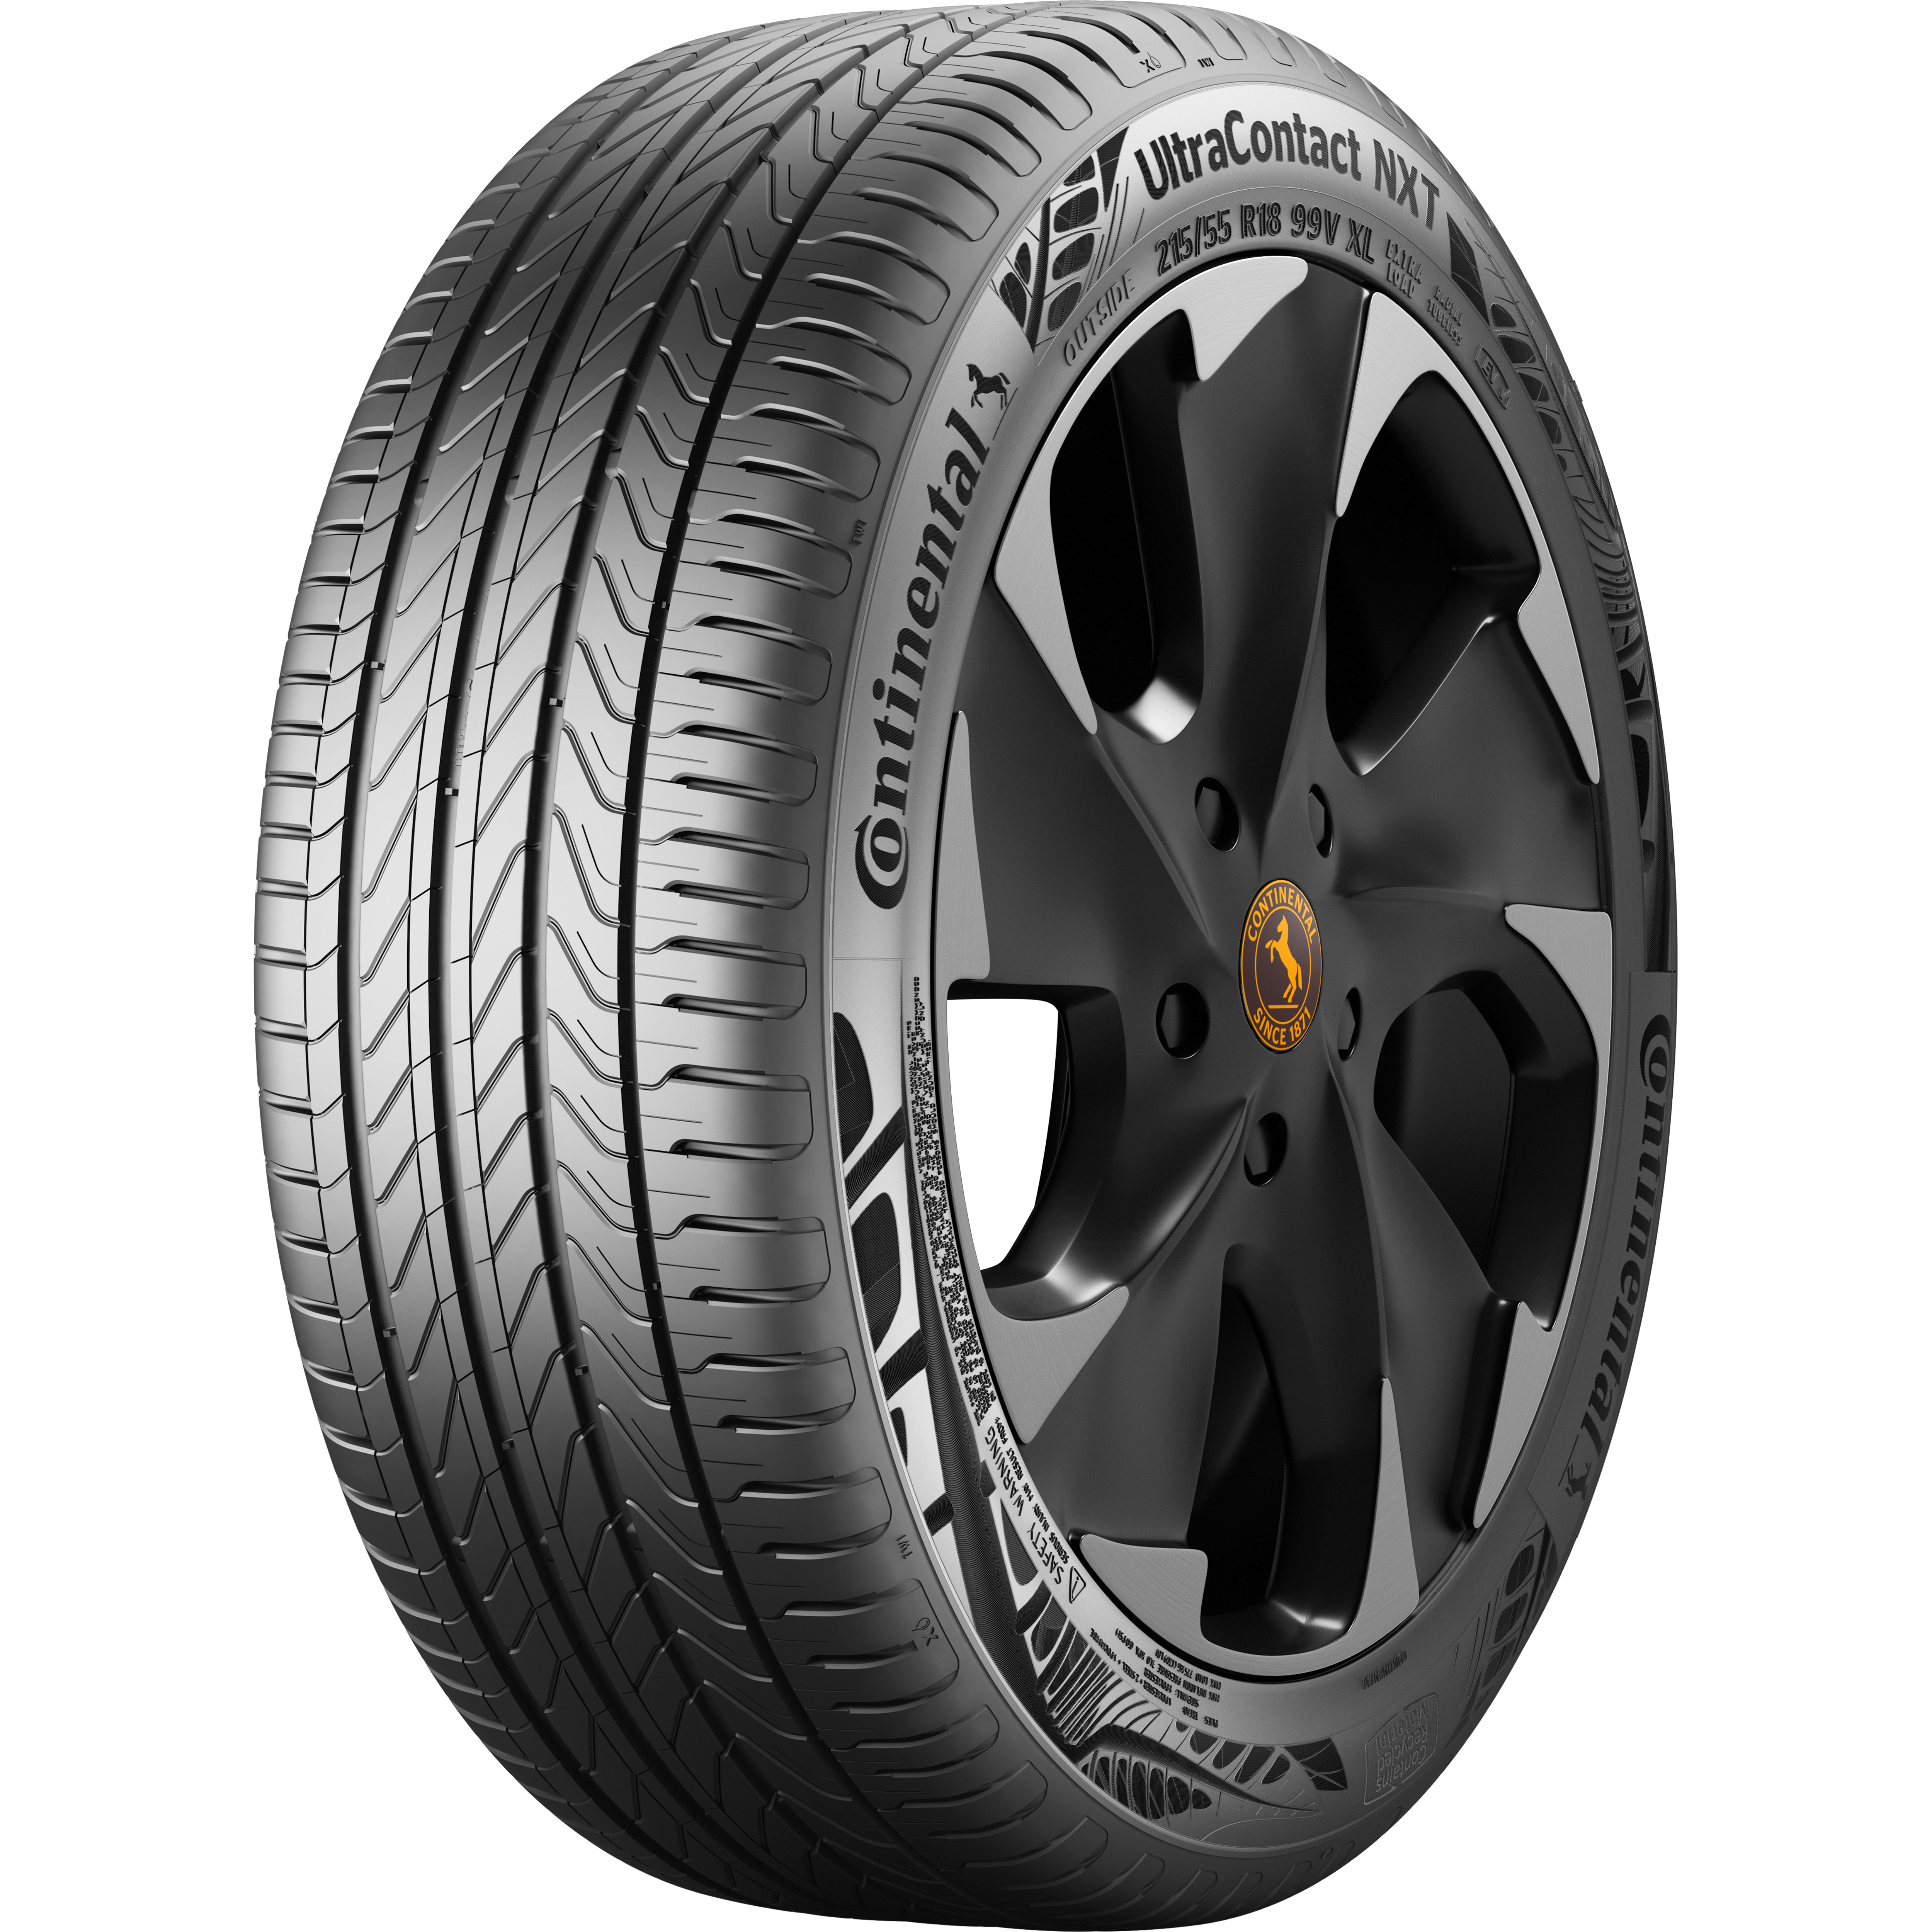 Continental UltraContact NXT tire